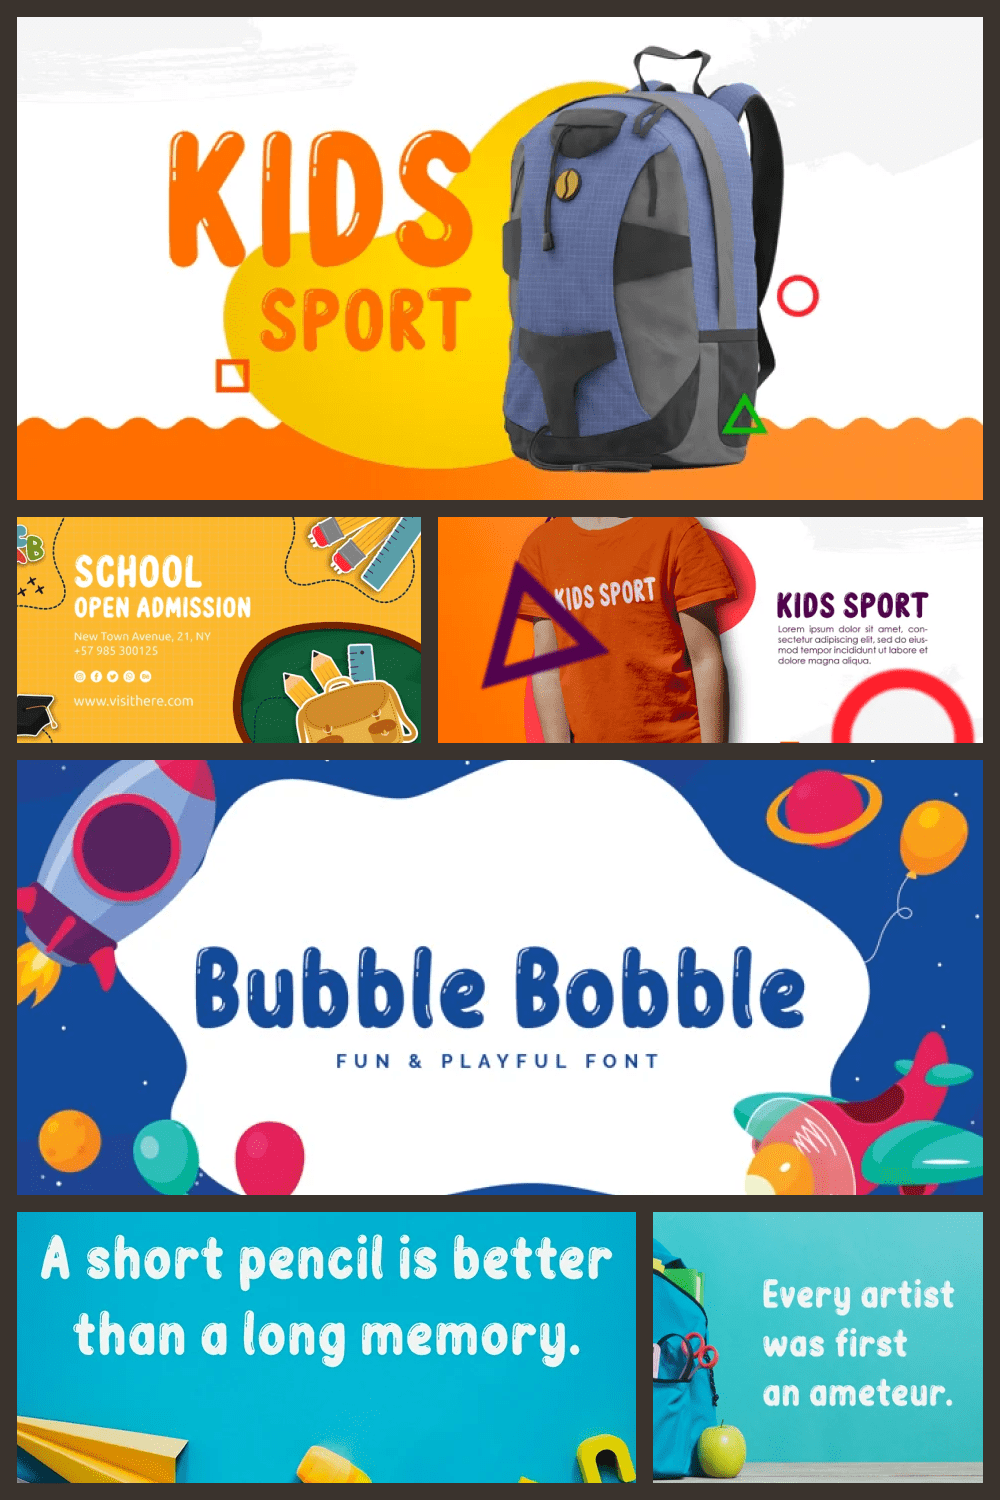 Bubble Bobble is such a Fun & Playful Font. Use it for any project that needs a cheerful and playful look.